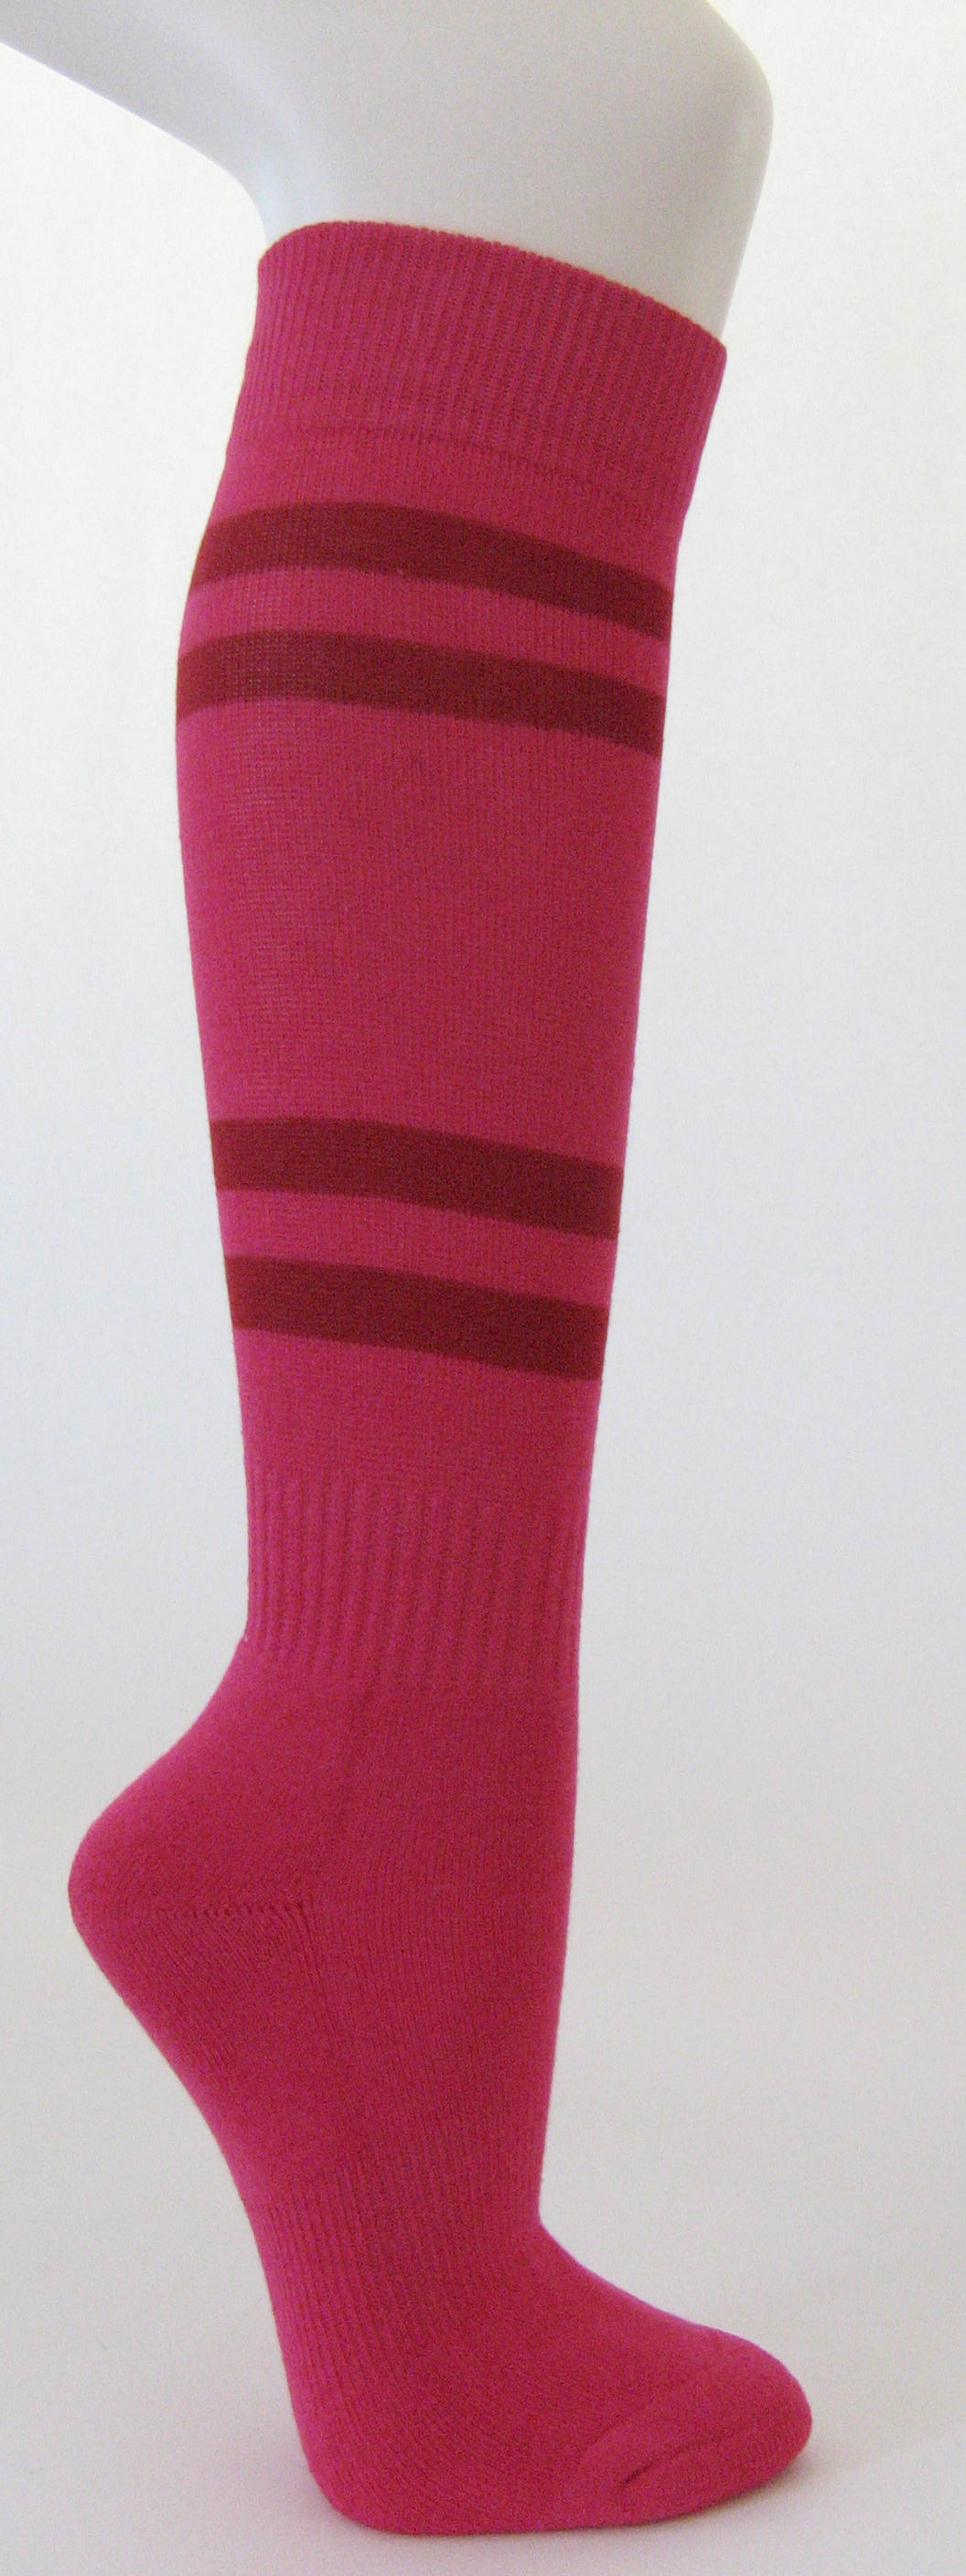 Hot pink cotton knee socks with dark red stripes